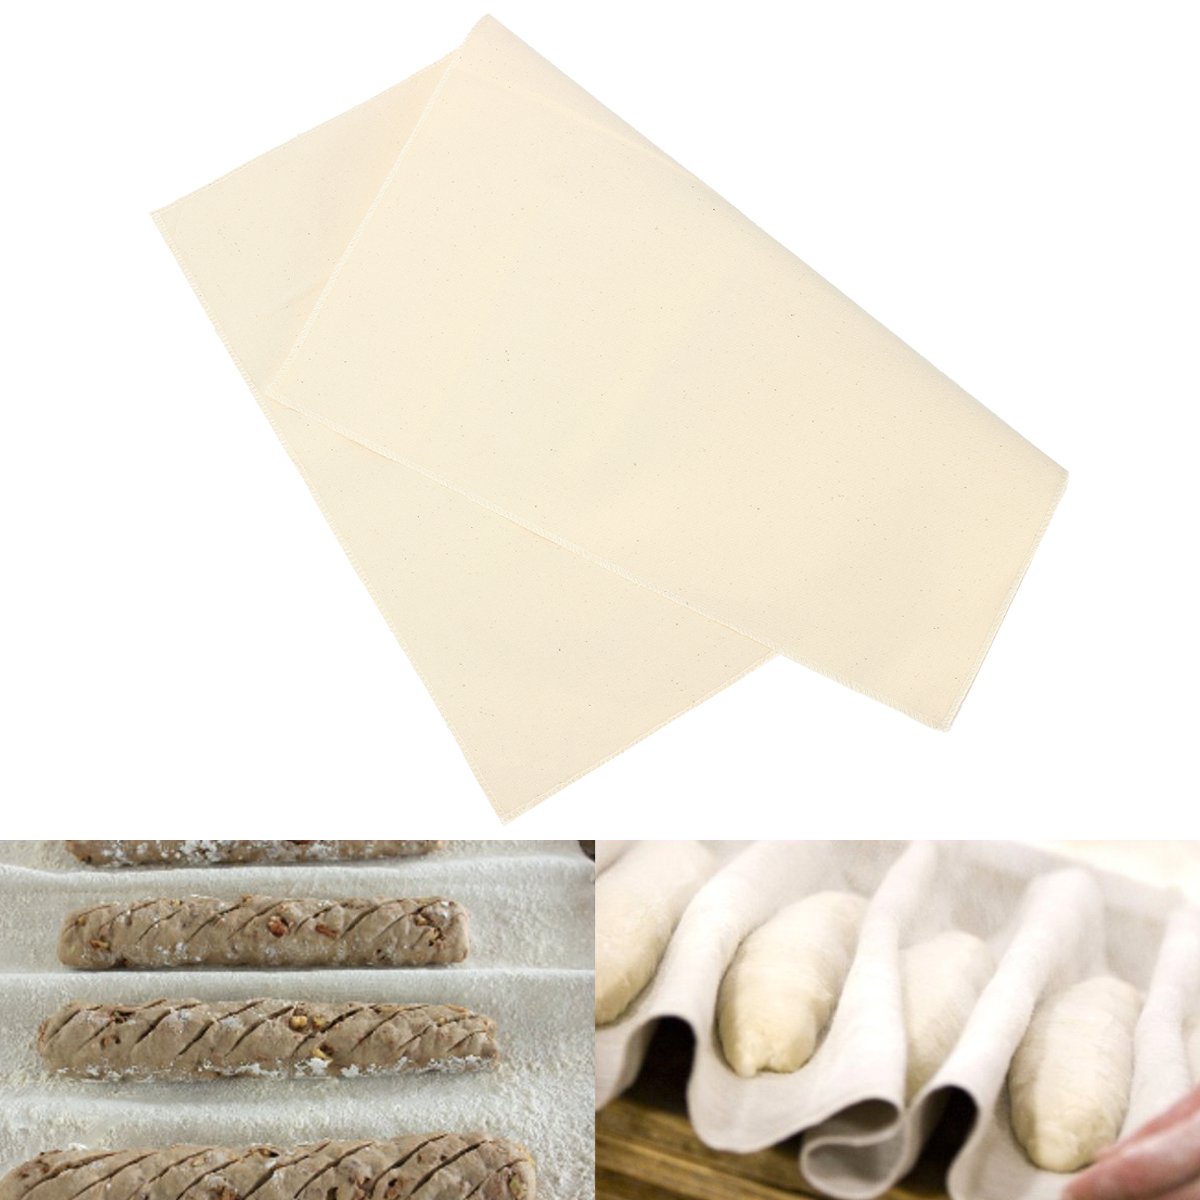 Flax-Liner-Cloth-Fiber-Cloth-Bakers-Proofing-Couche-for-Proving-Bread-Pans-Kitchen-Tool-Fermentation-1141080-10